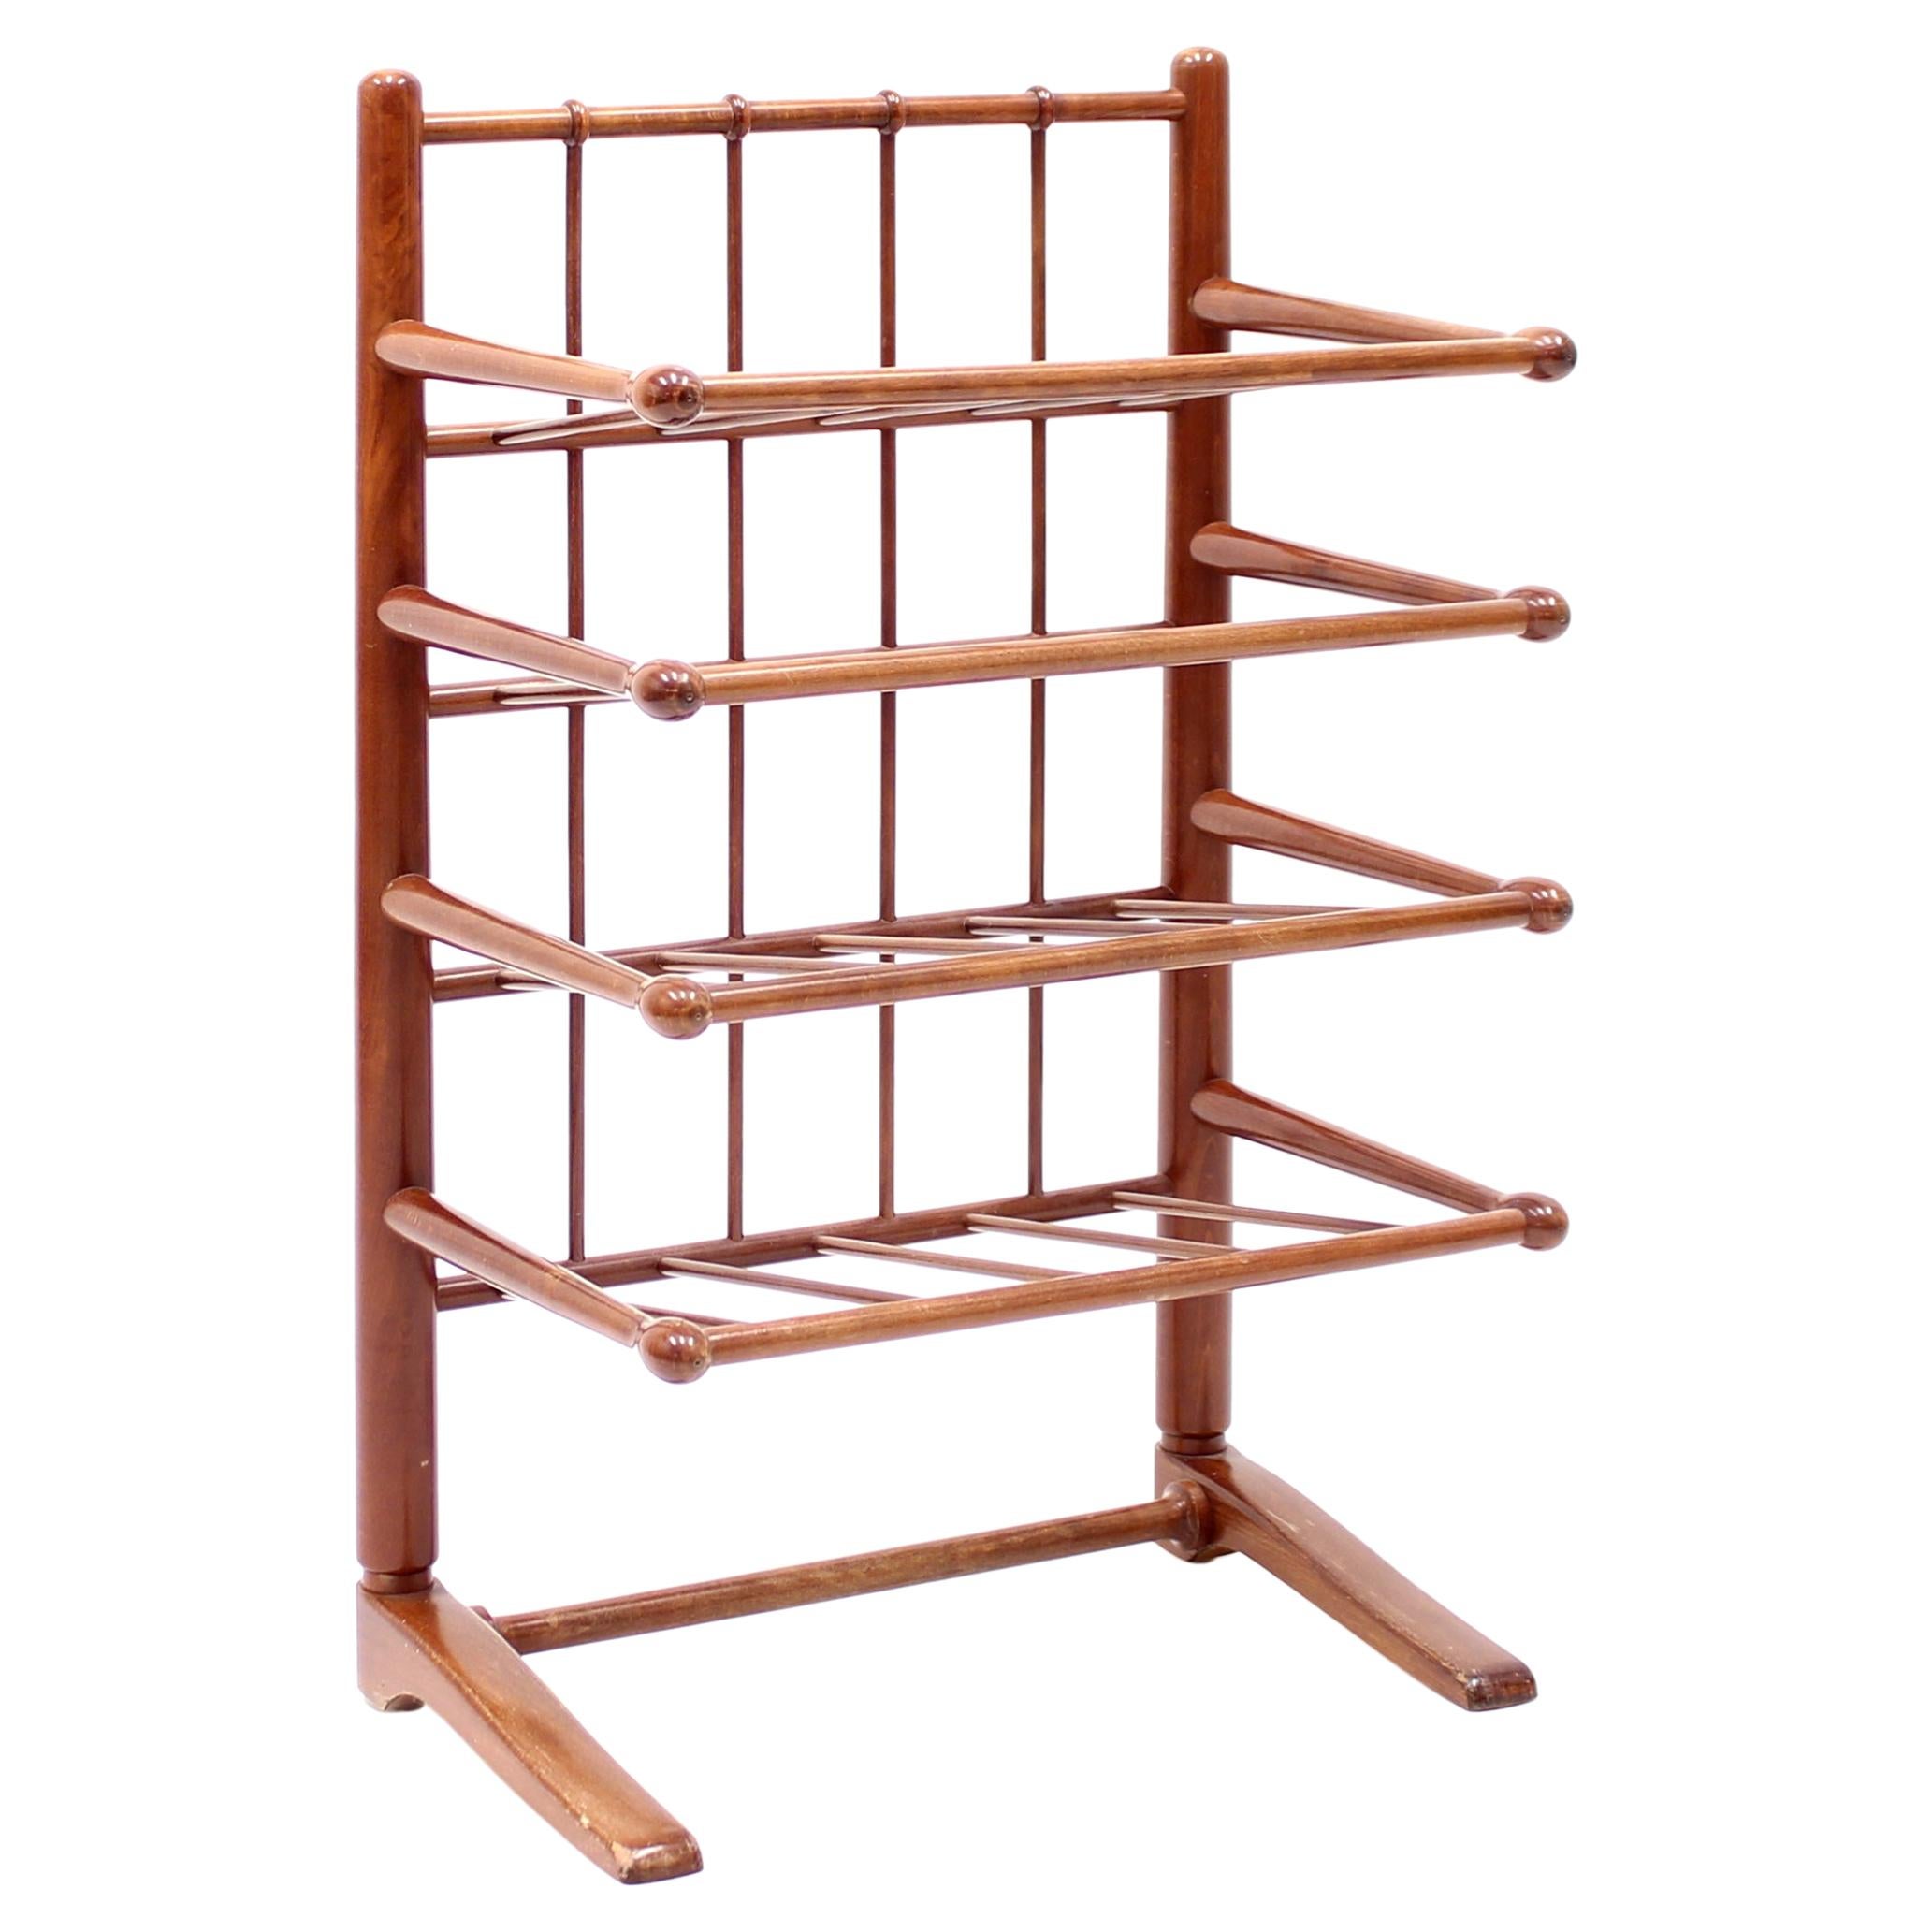 Mahogany Magazin or Note Rack, Attributed to Josef Frank, 1950s